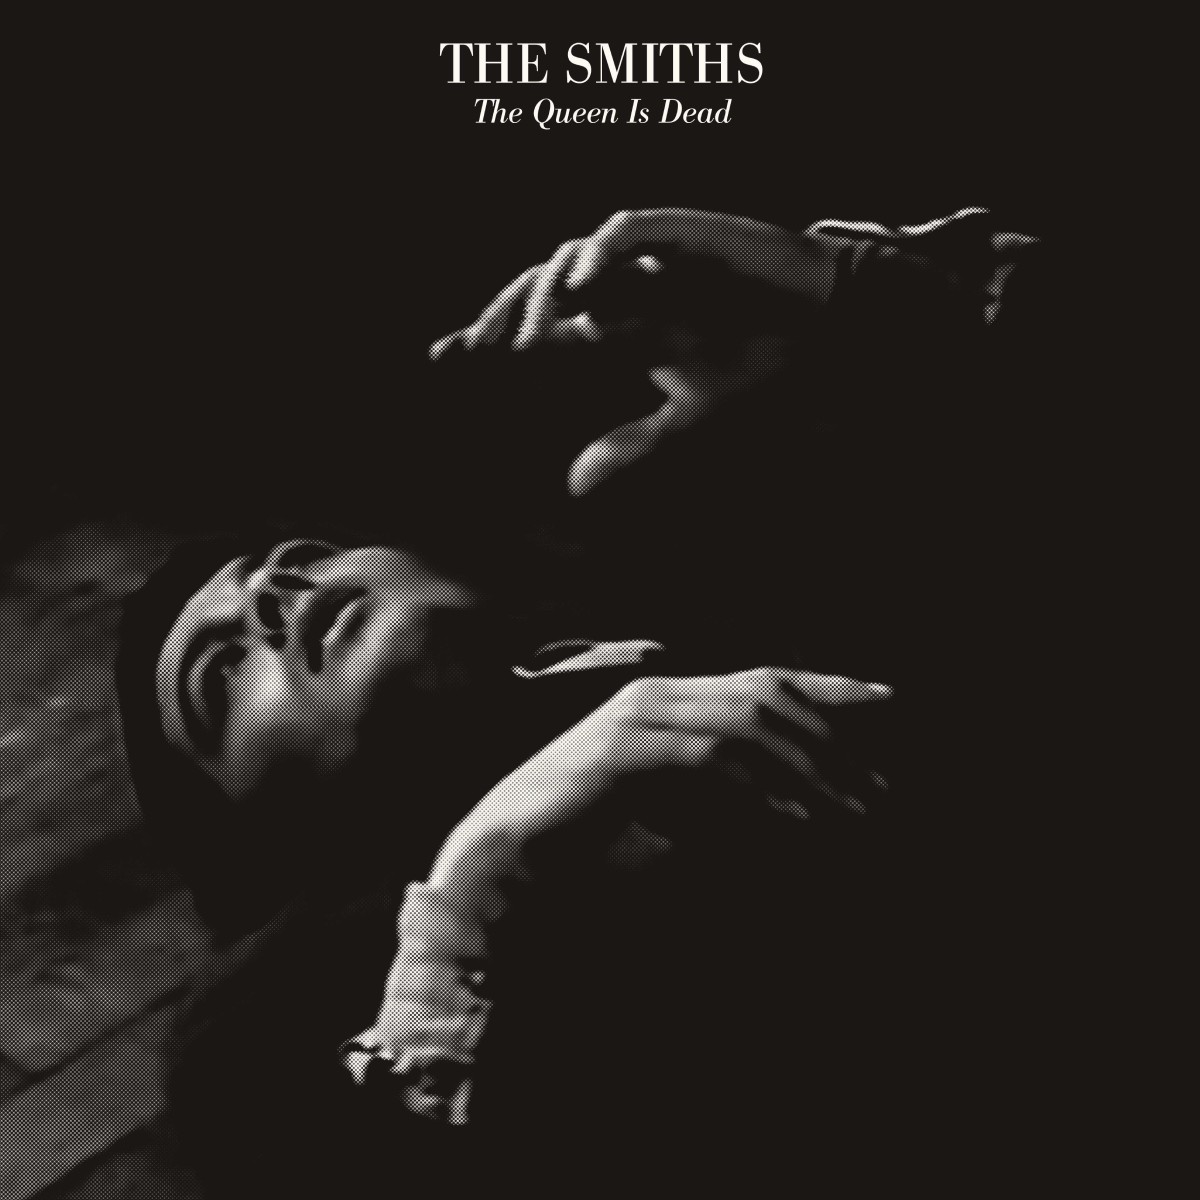 The Queen Is Dead (1986) – The Smiths (album cover)